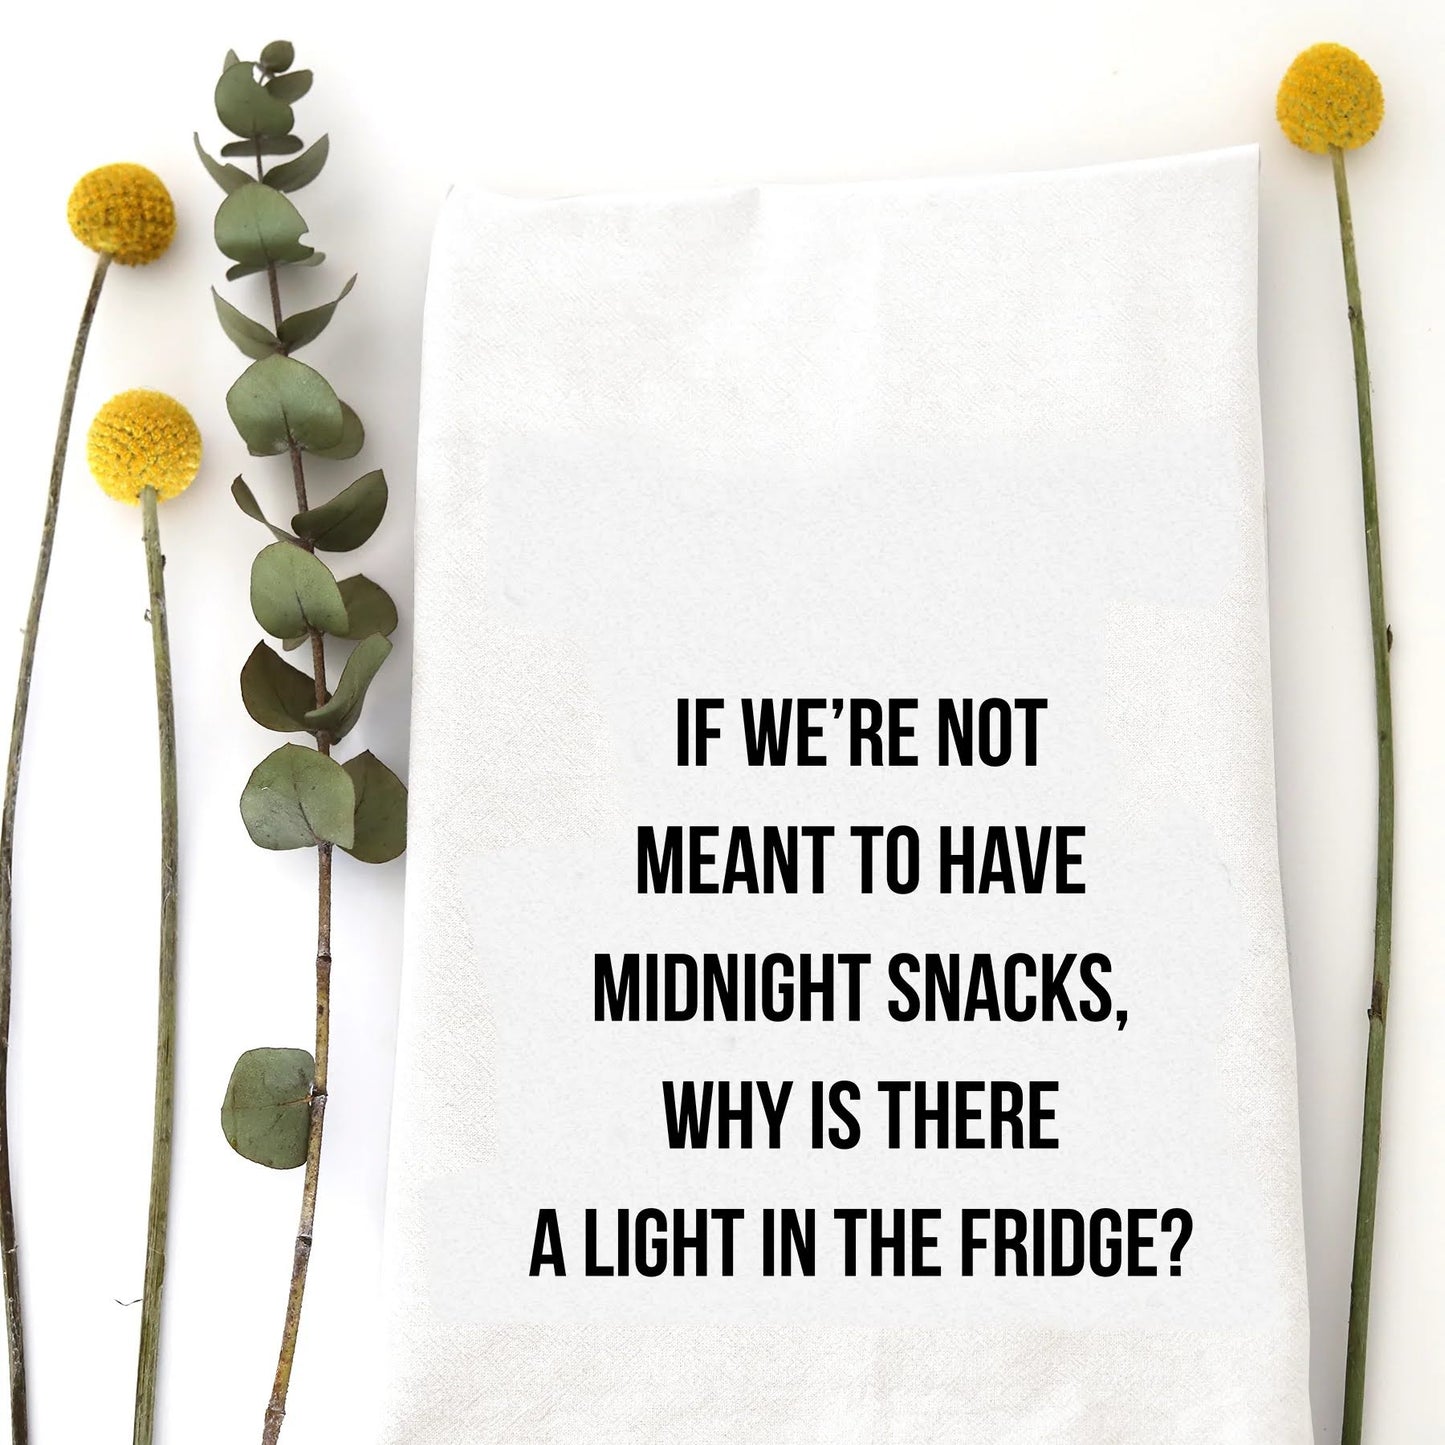 A tea towel with a funny saying - If we're not meant to have midnight snacks, why is there a light in the fridge?